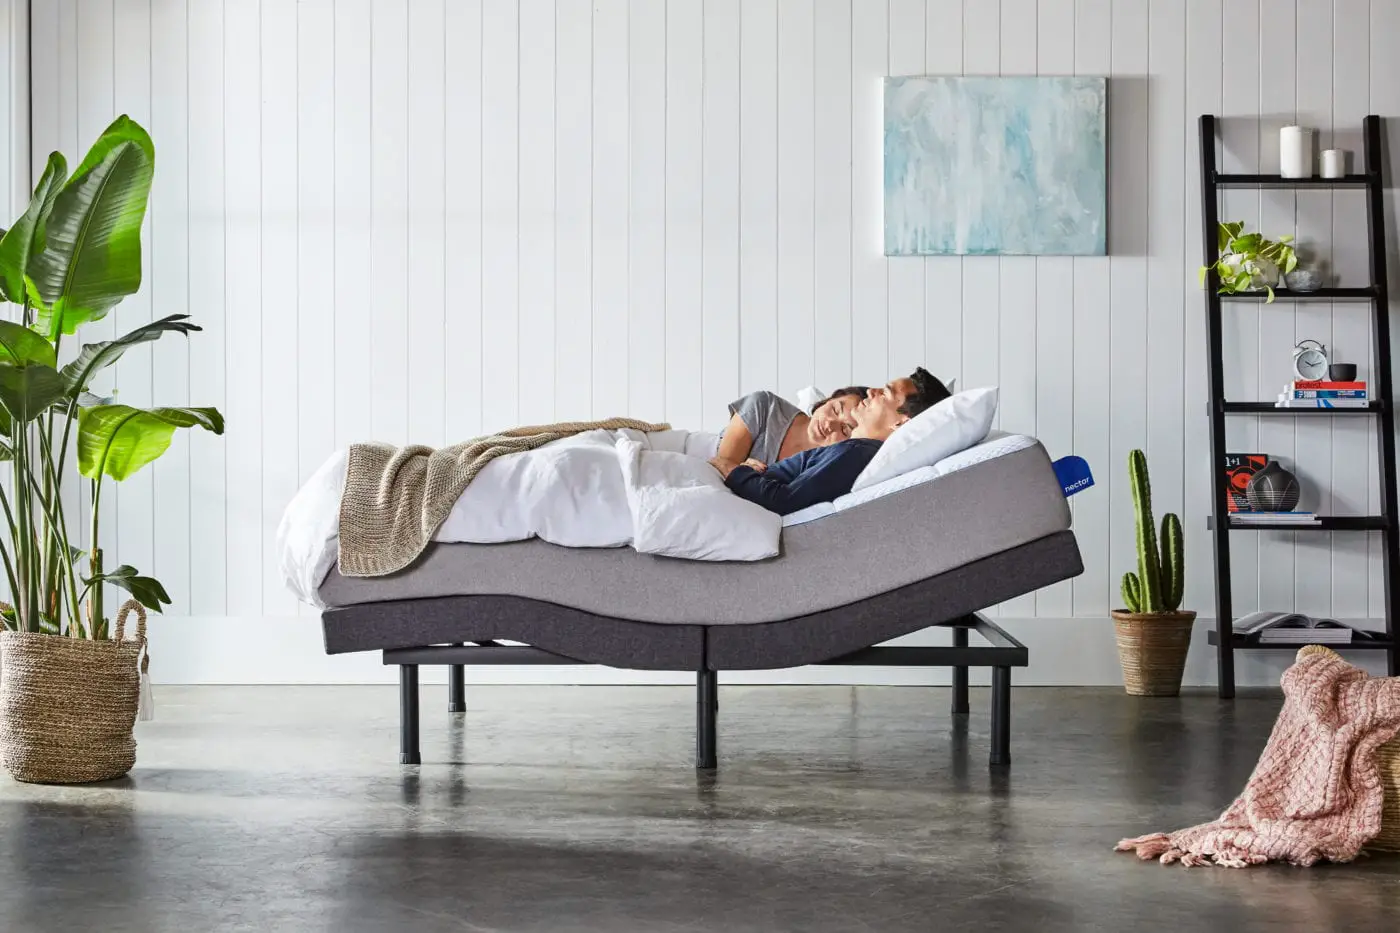 Best Mattress For Back Pain? This Bed Helps Manage Back ...